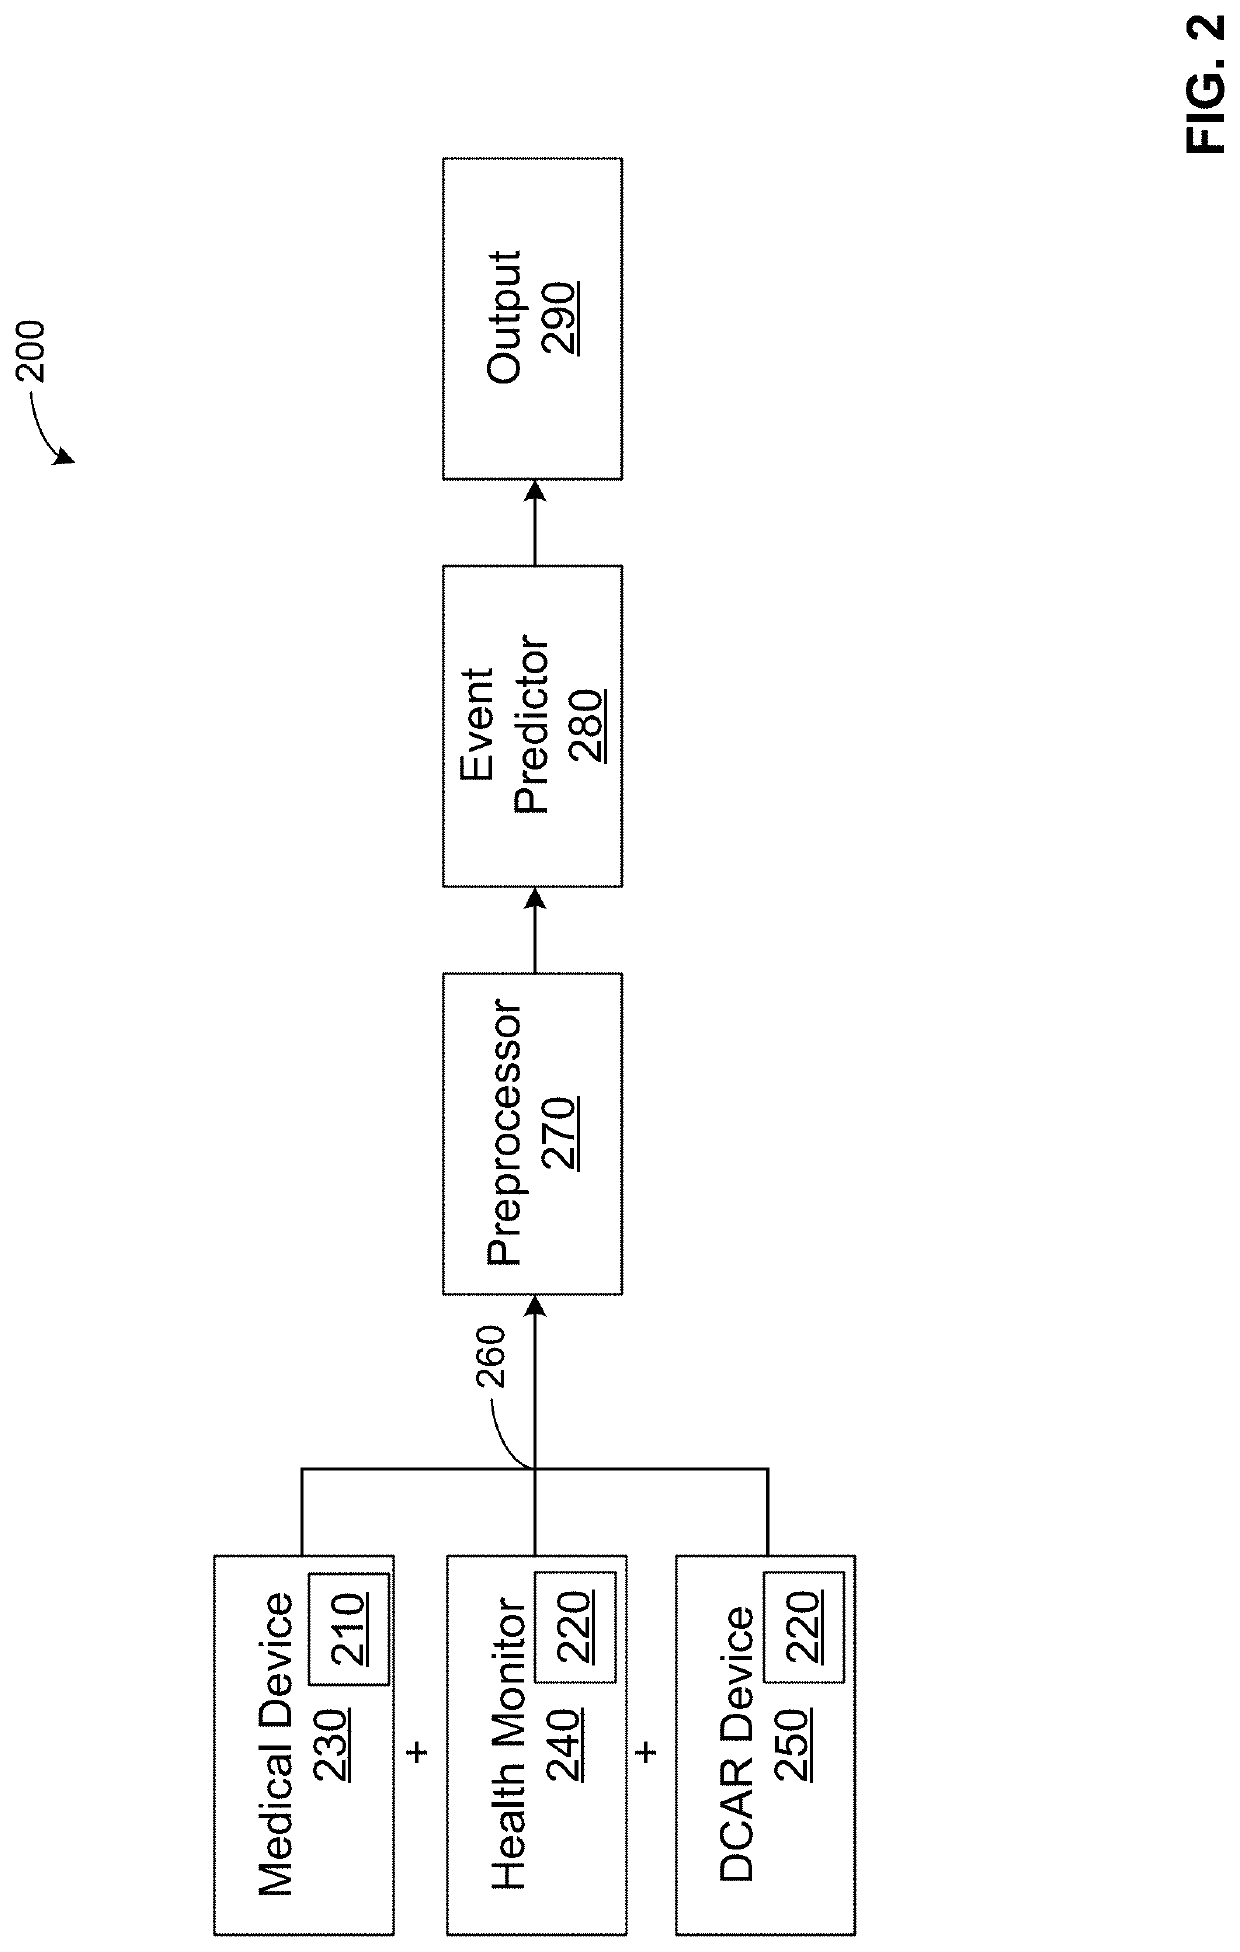 Visualization of medical device event processing